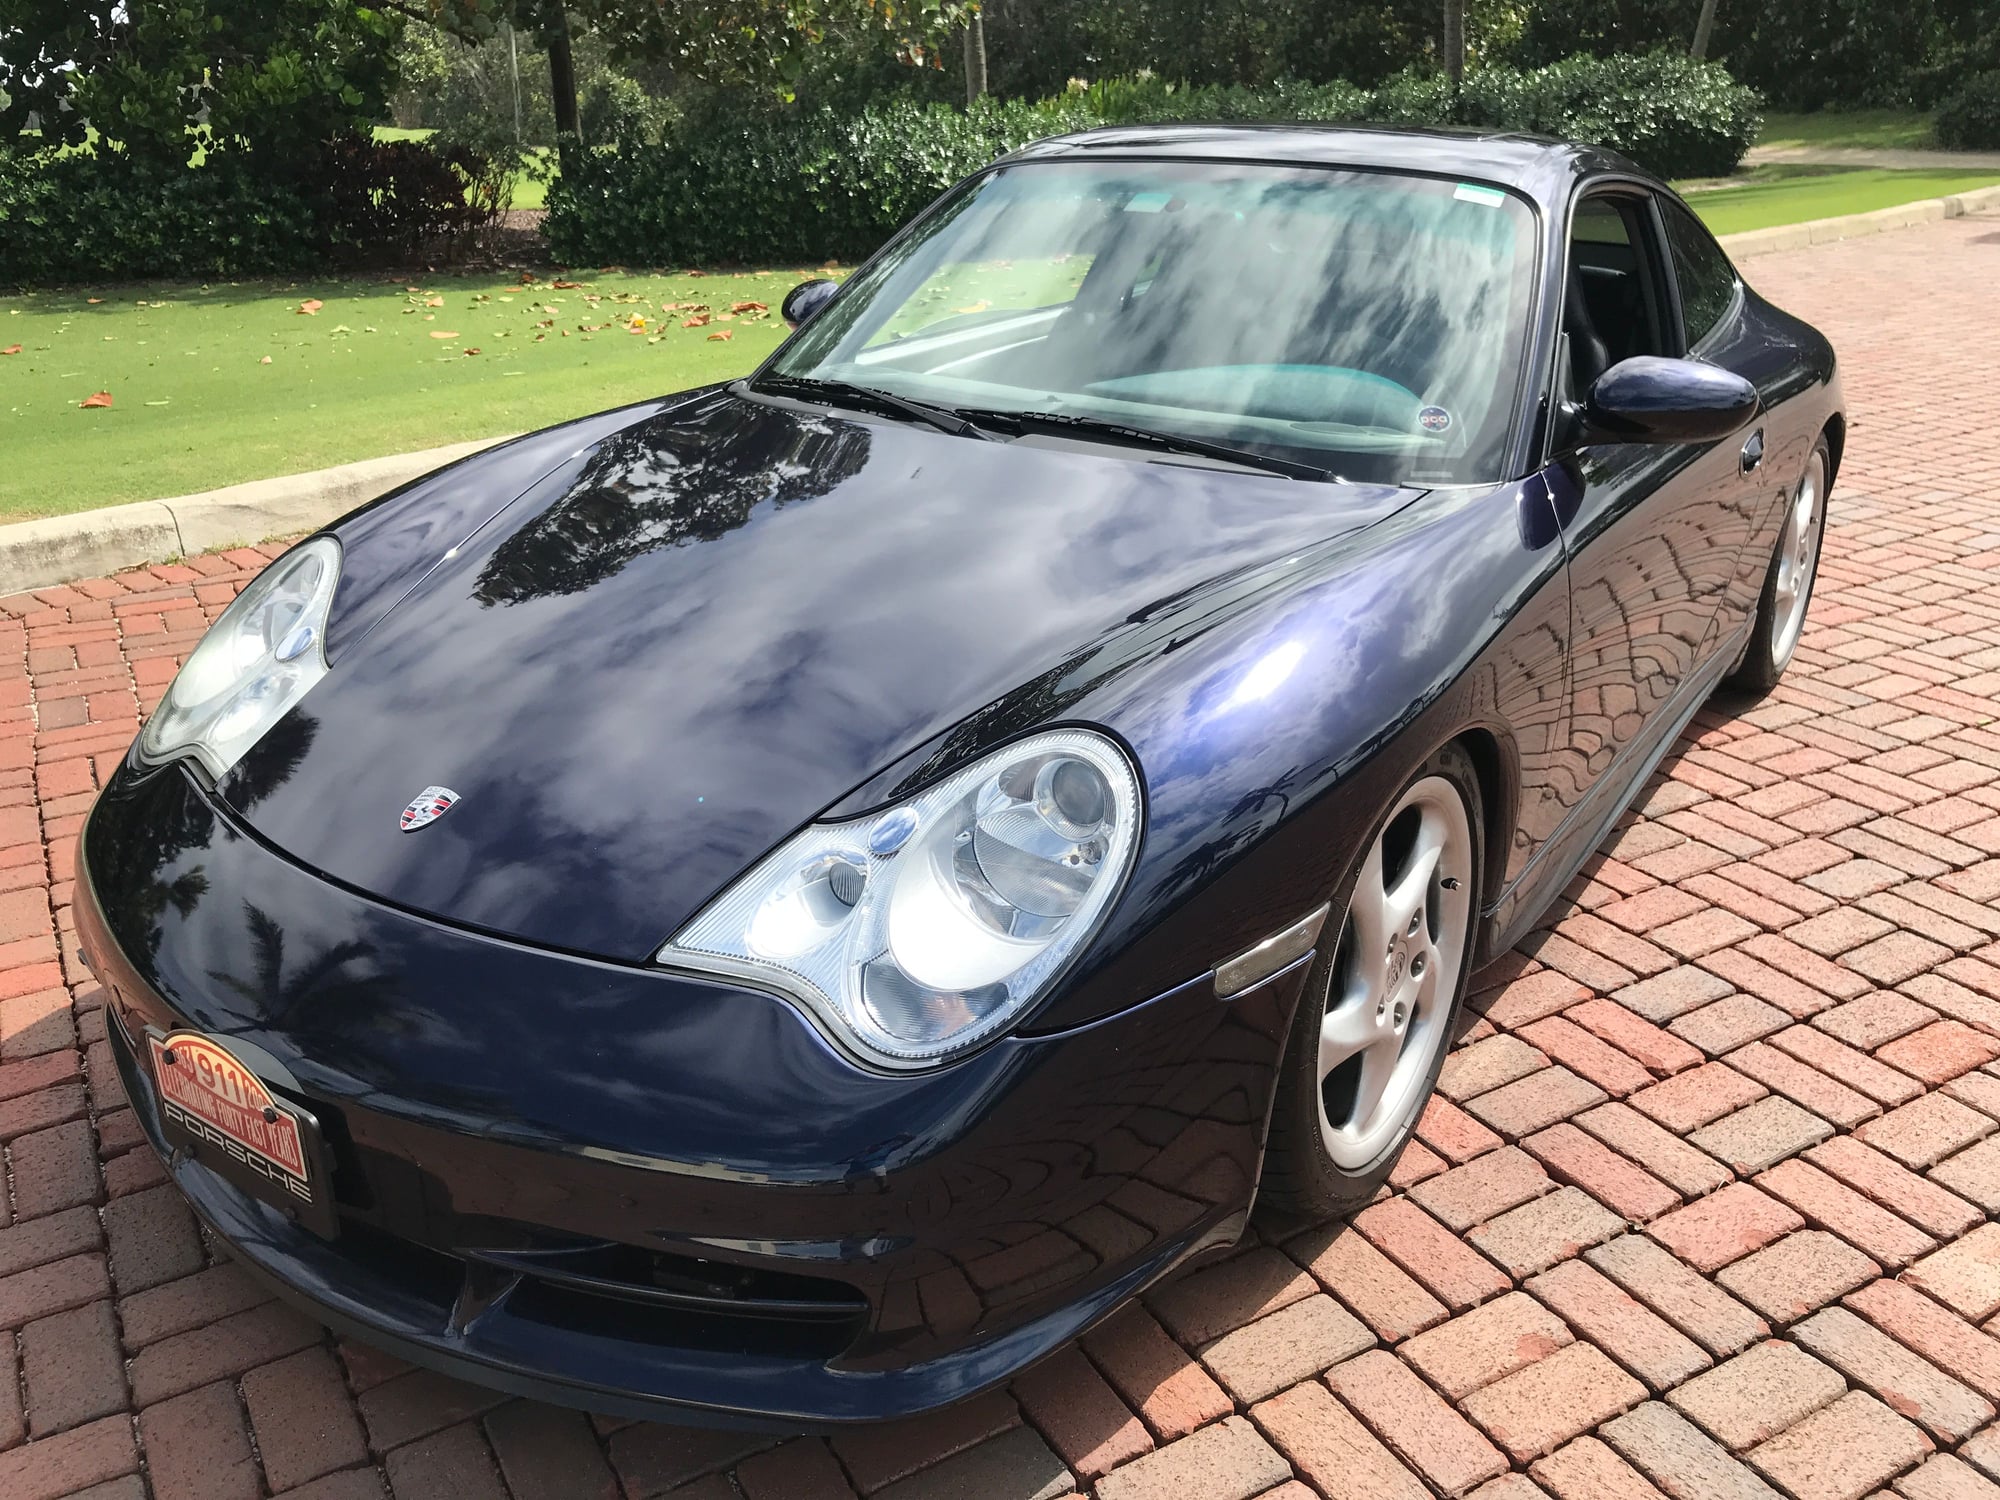 2003 Porsche 911 - 2 Owner 2003 Carerra Coupe - Used - VIN WPOAA29913S621237 - 100,240 Miles - 6 cyl - 2WD - Manual - Coupe - Blue - Boynton Beach, FL 33437, United States